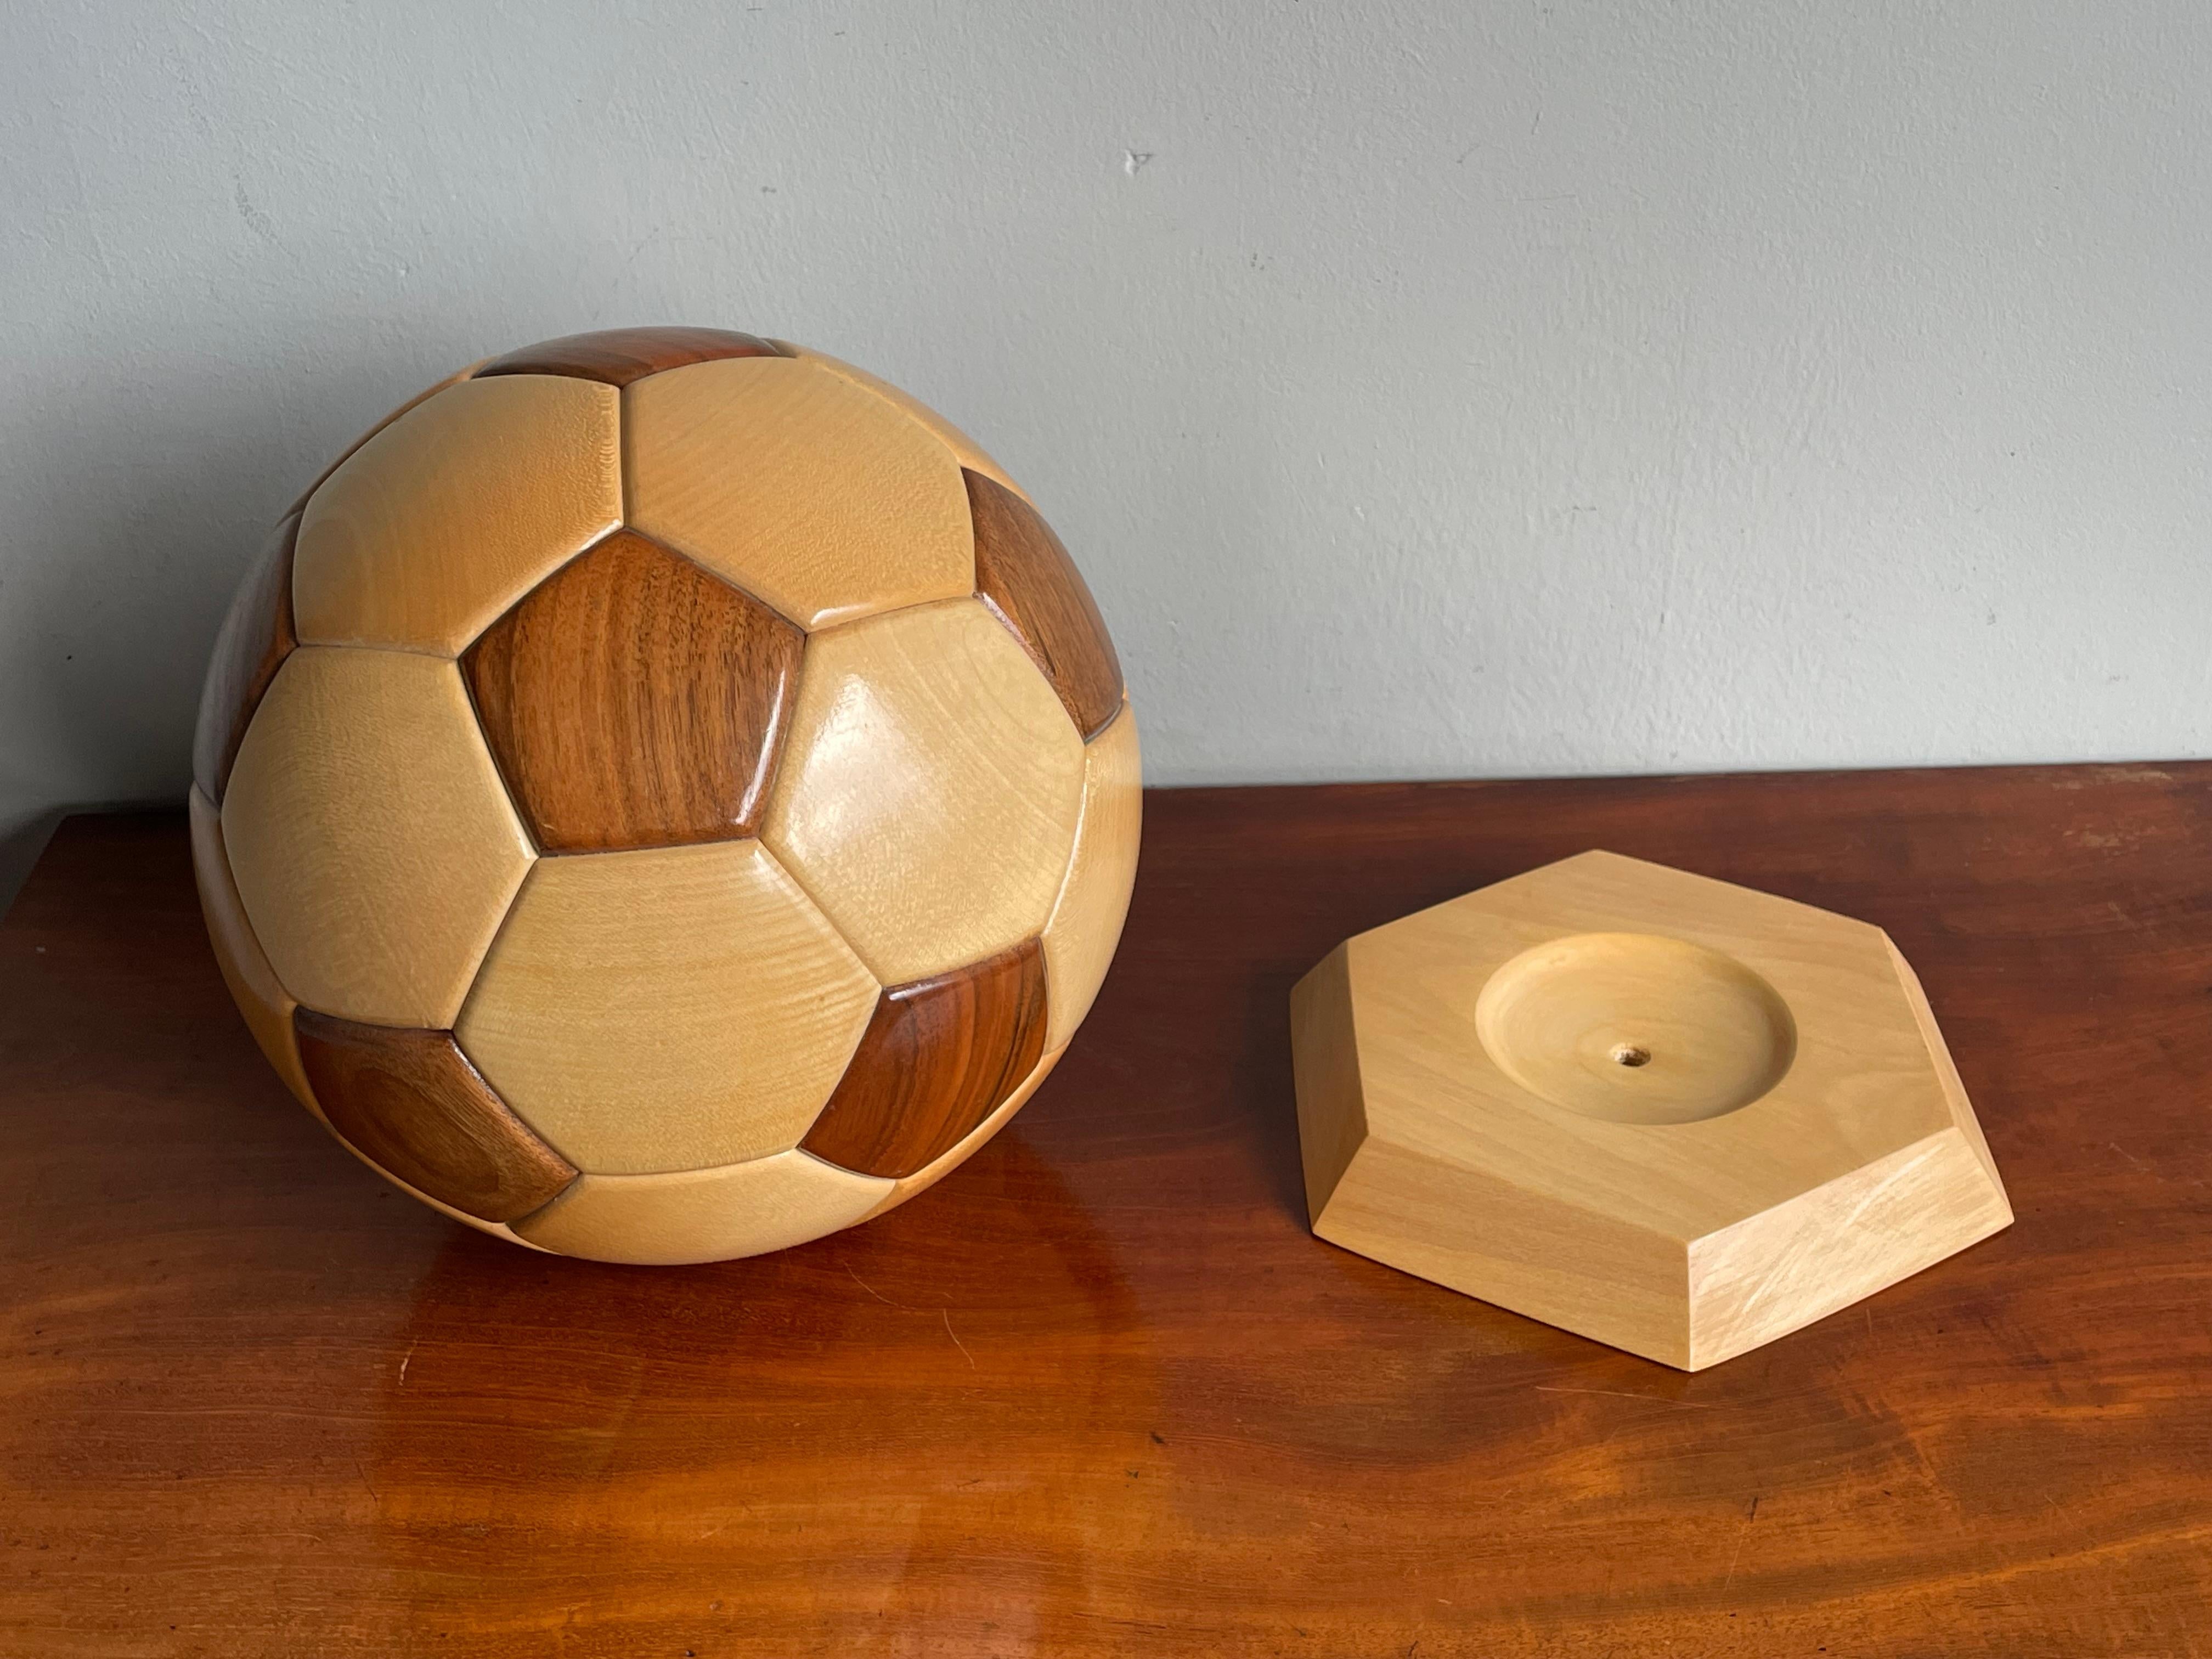 All Handmade Vintage 1980s Wooden Soccer Ball / Football Sculpture / Desk Piece In Excellent Condition For Sale In Lisse, NL